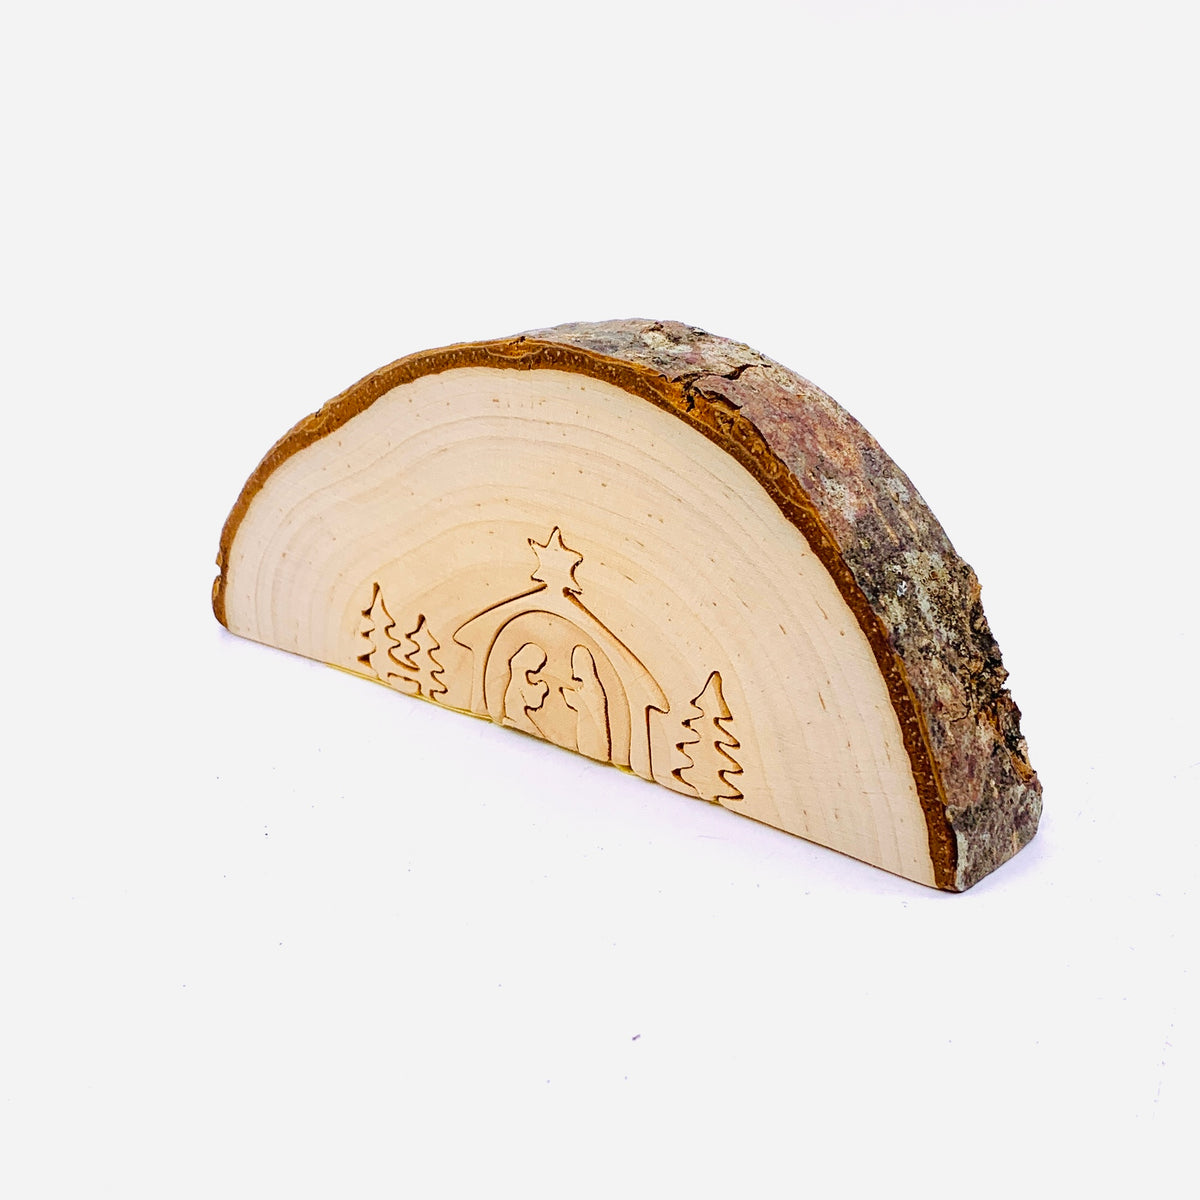 Hand 3D Carved Wood Nativity Scene 9